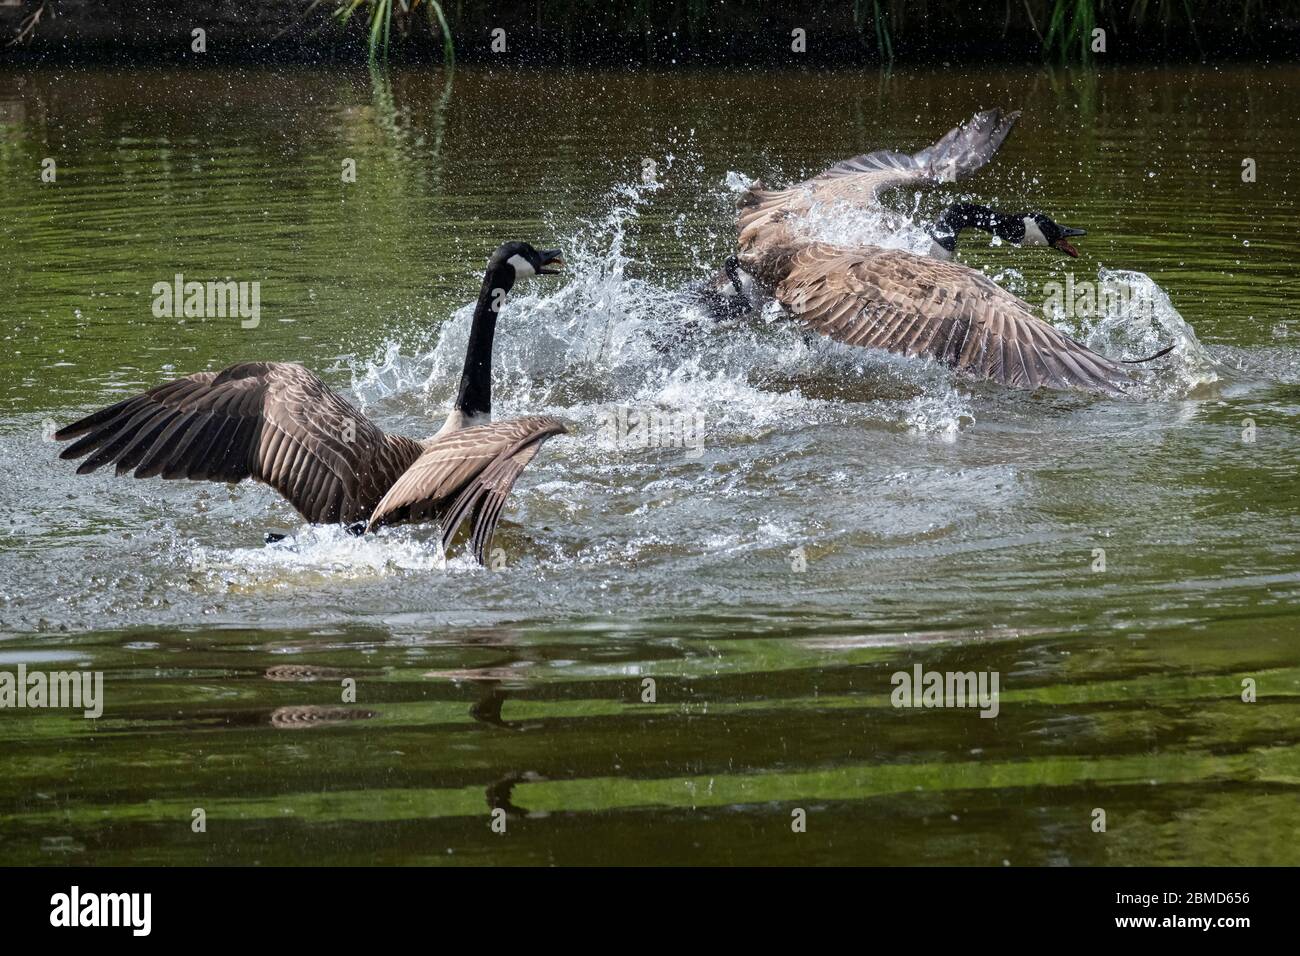 Canada Geese (Branta canadensis) squabbling on the River Weaver, Cheshire, England, UK Stock Photo